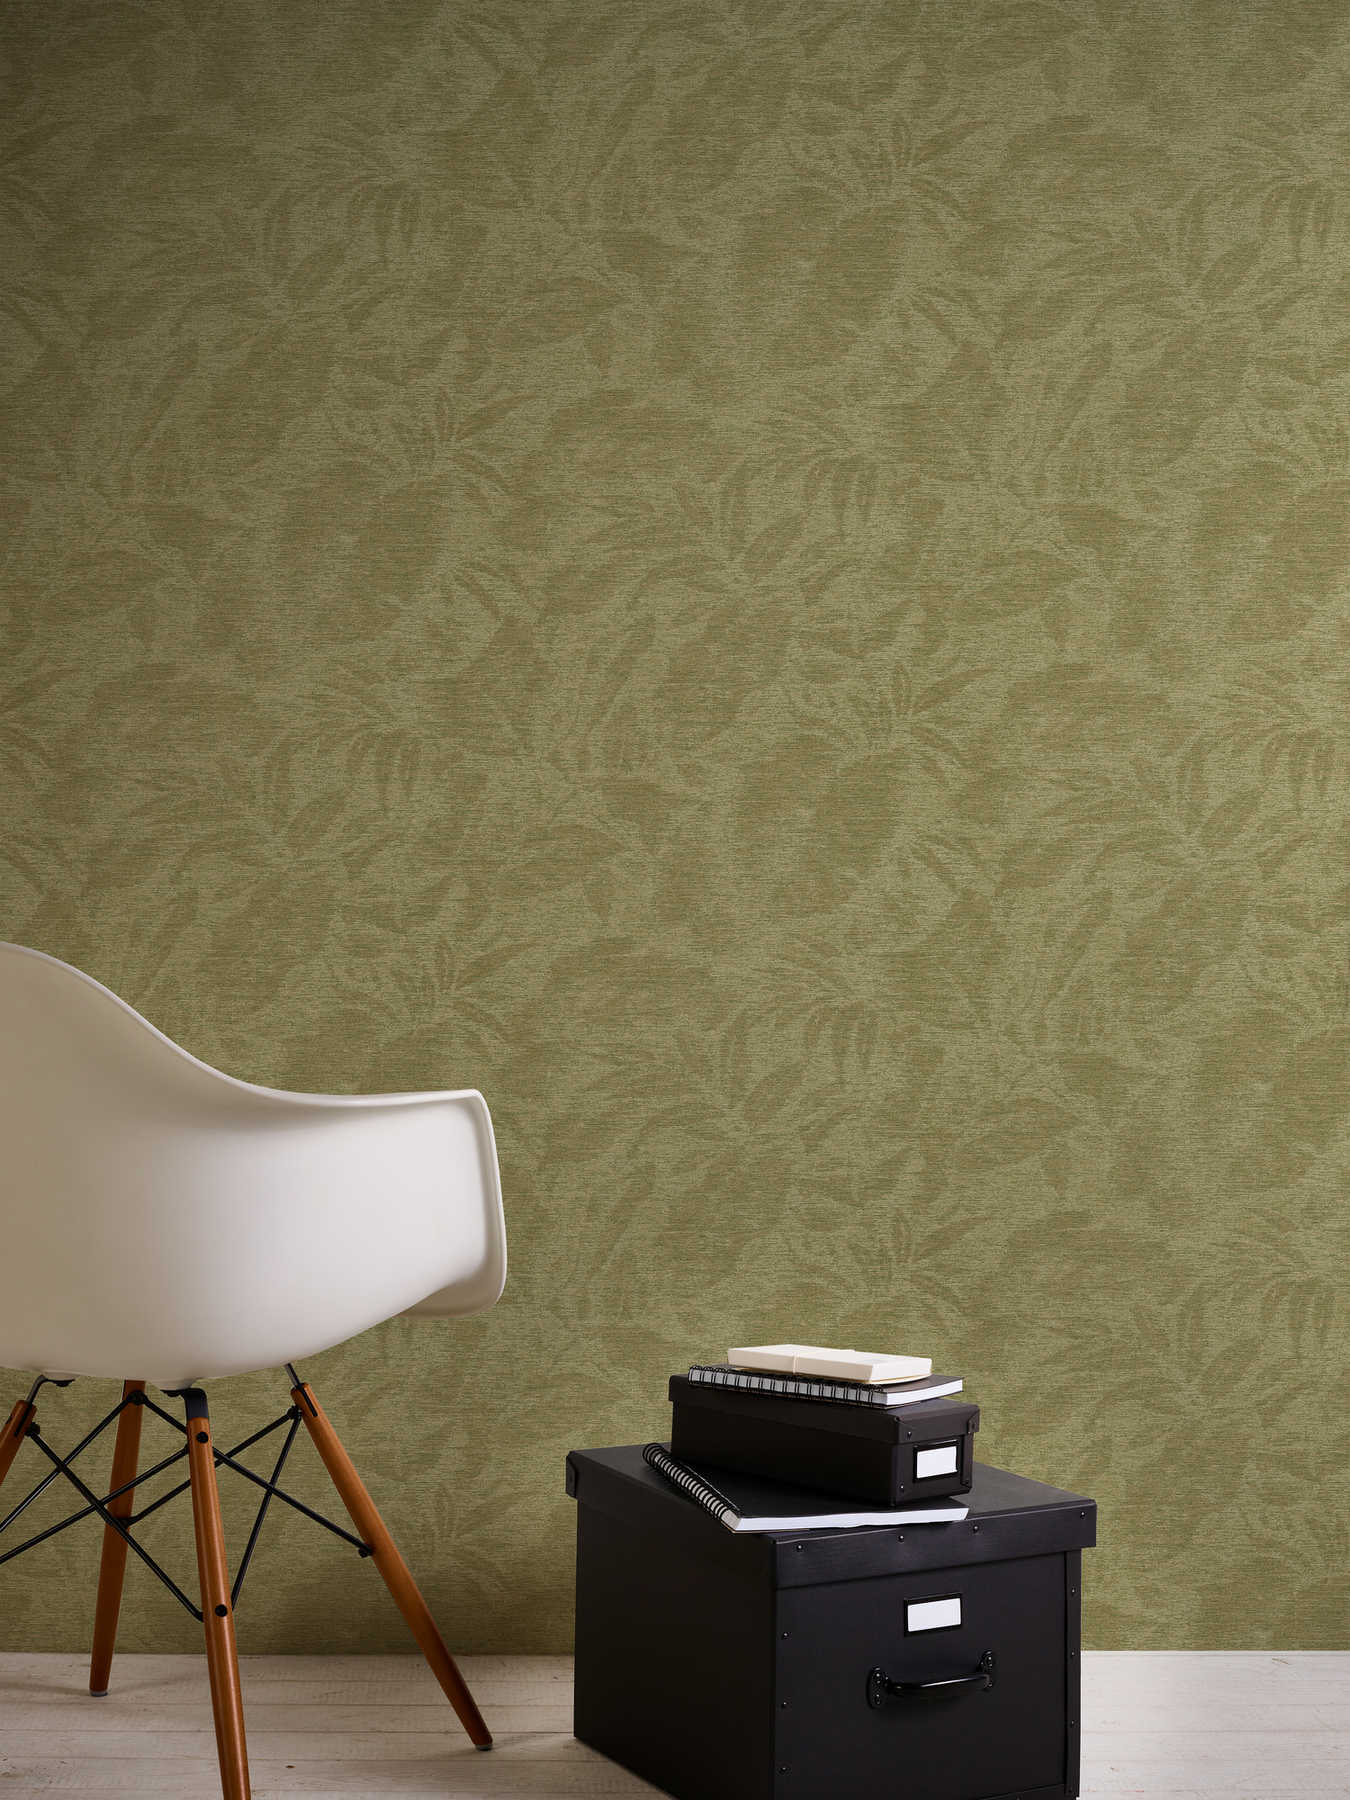             Mottled non-woven wallpaper with leaf pattern - green
        